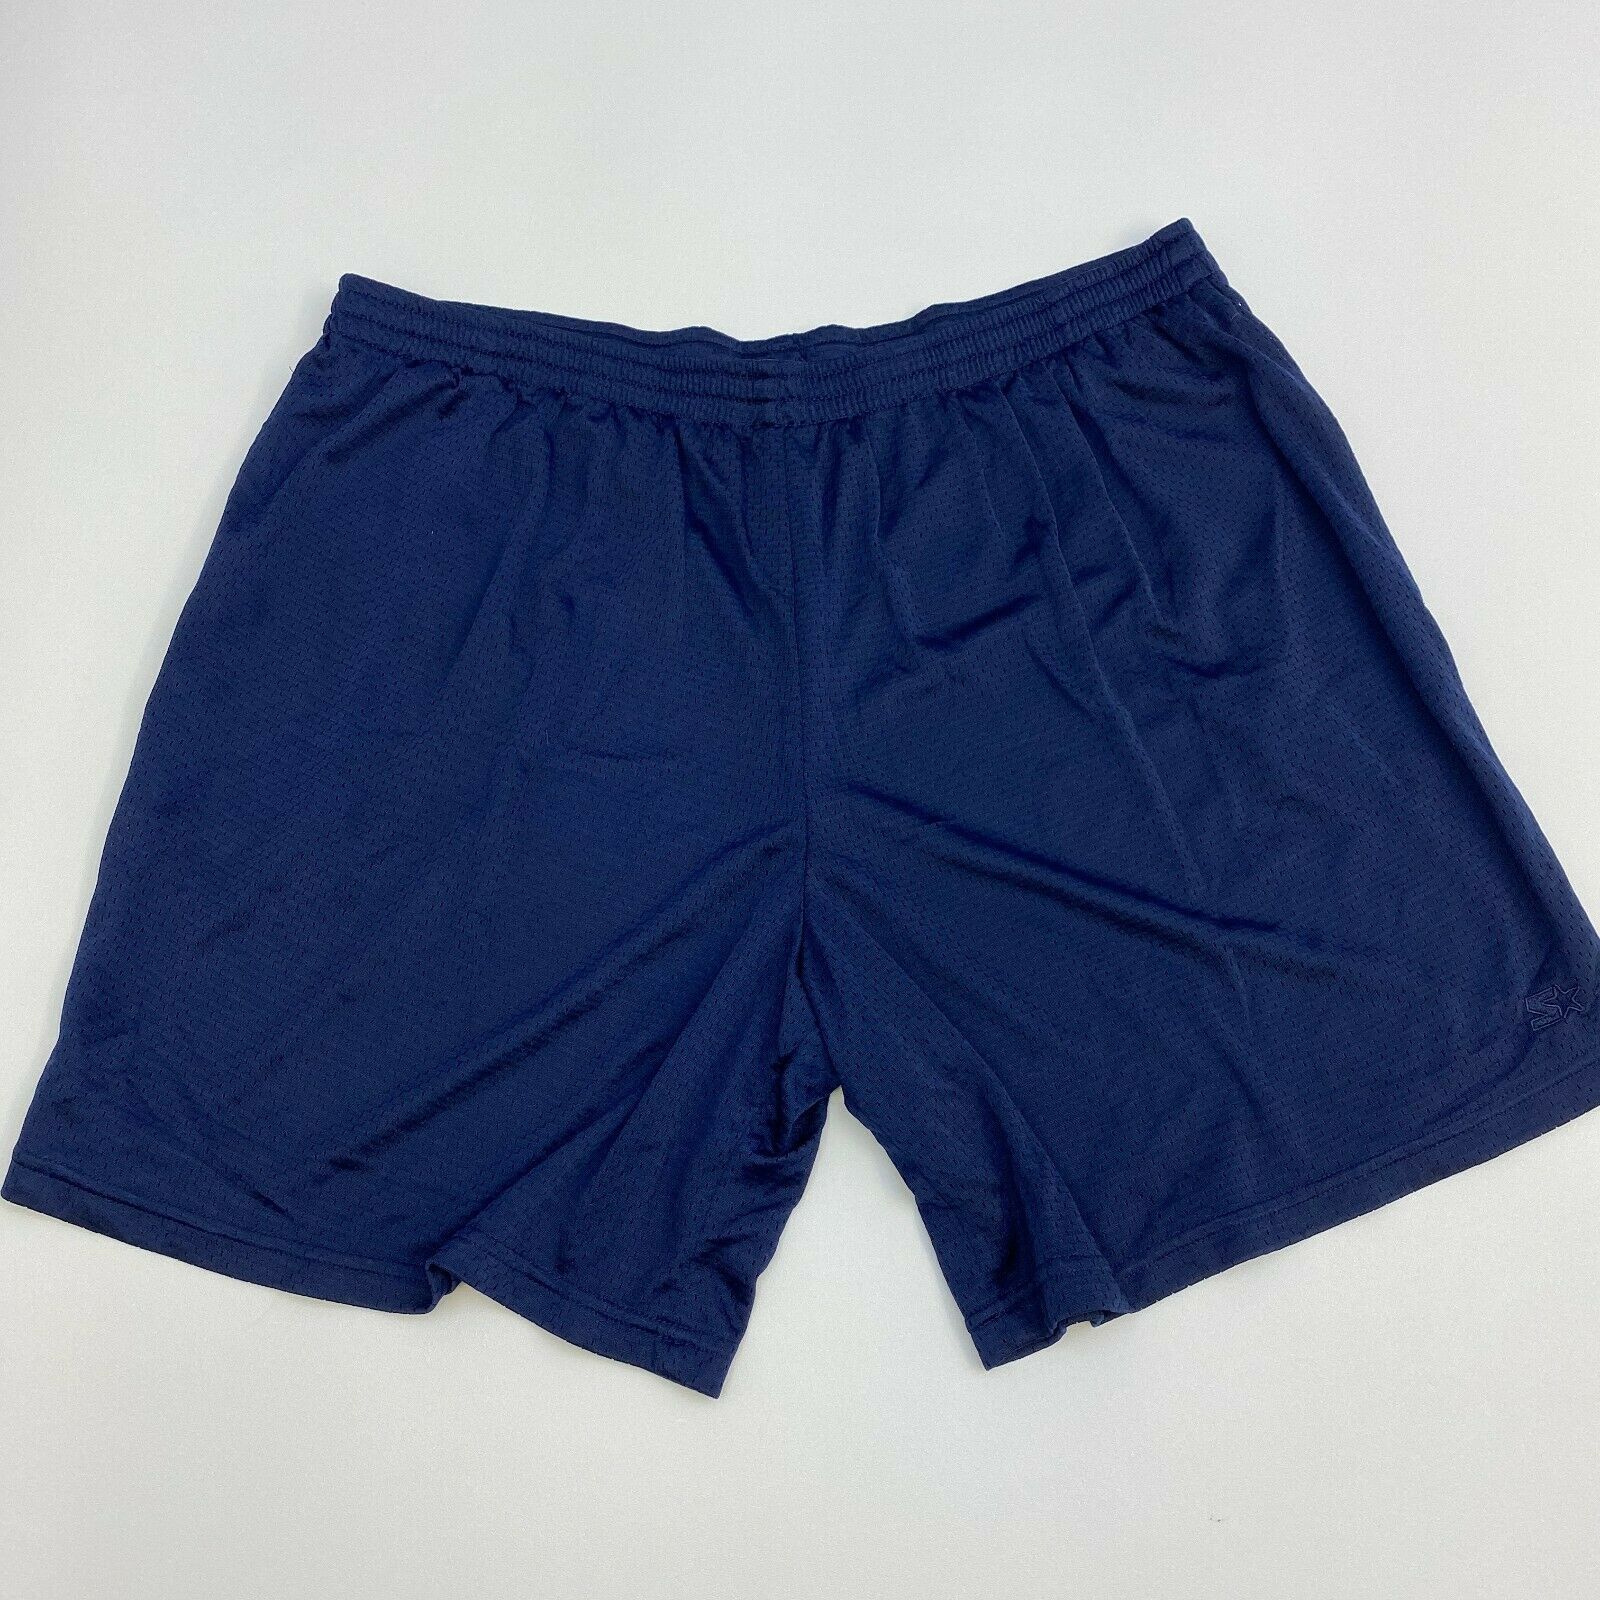 Starter Athletic Shorts Mens XXL Blue Casual Workout Basketball - Shorts